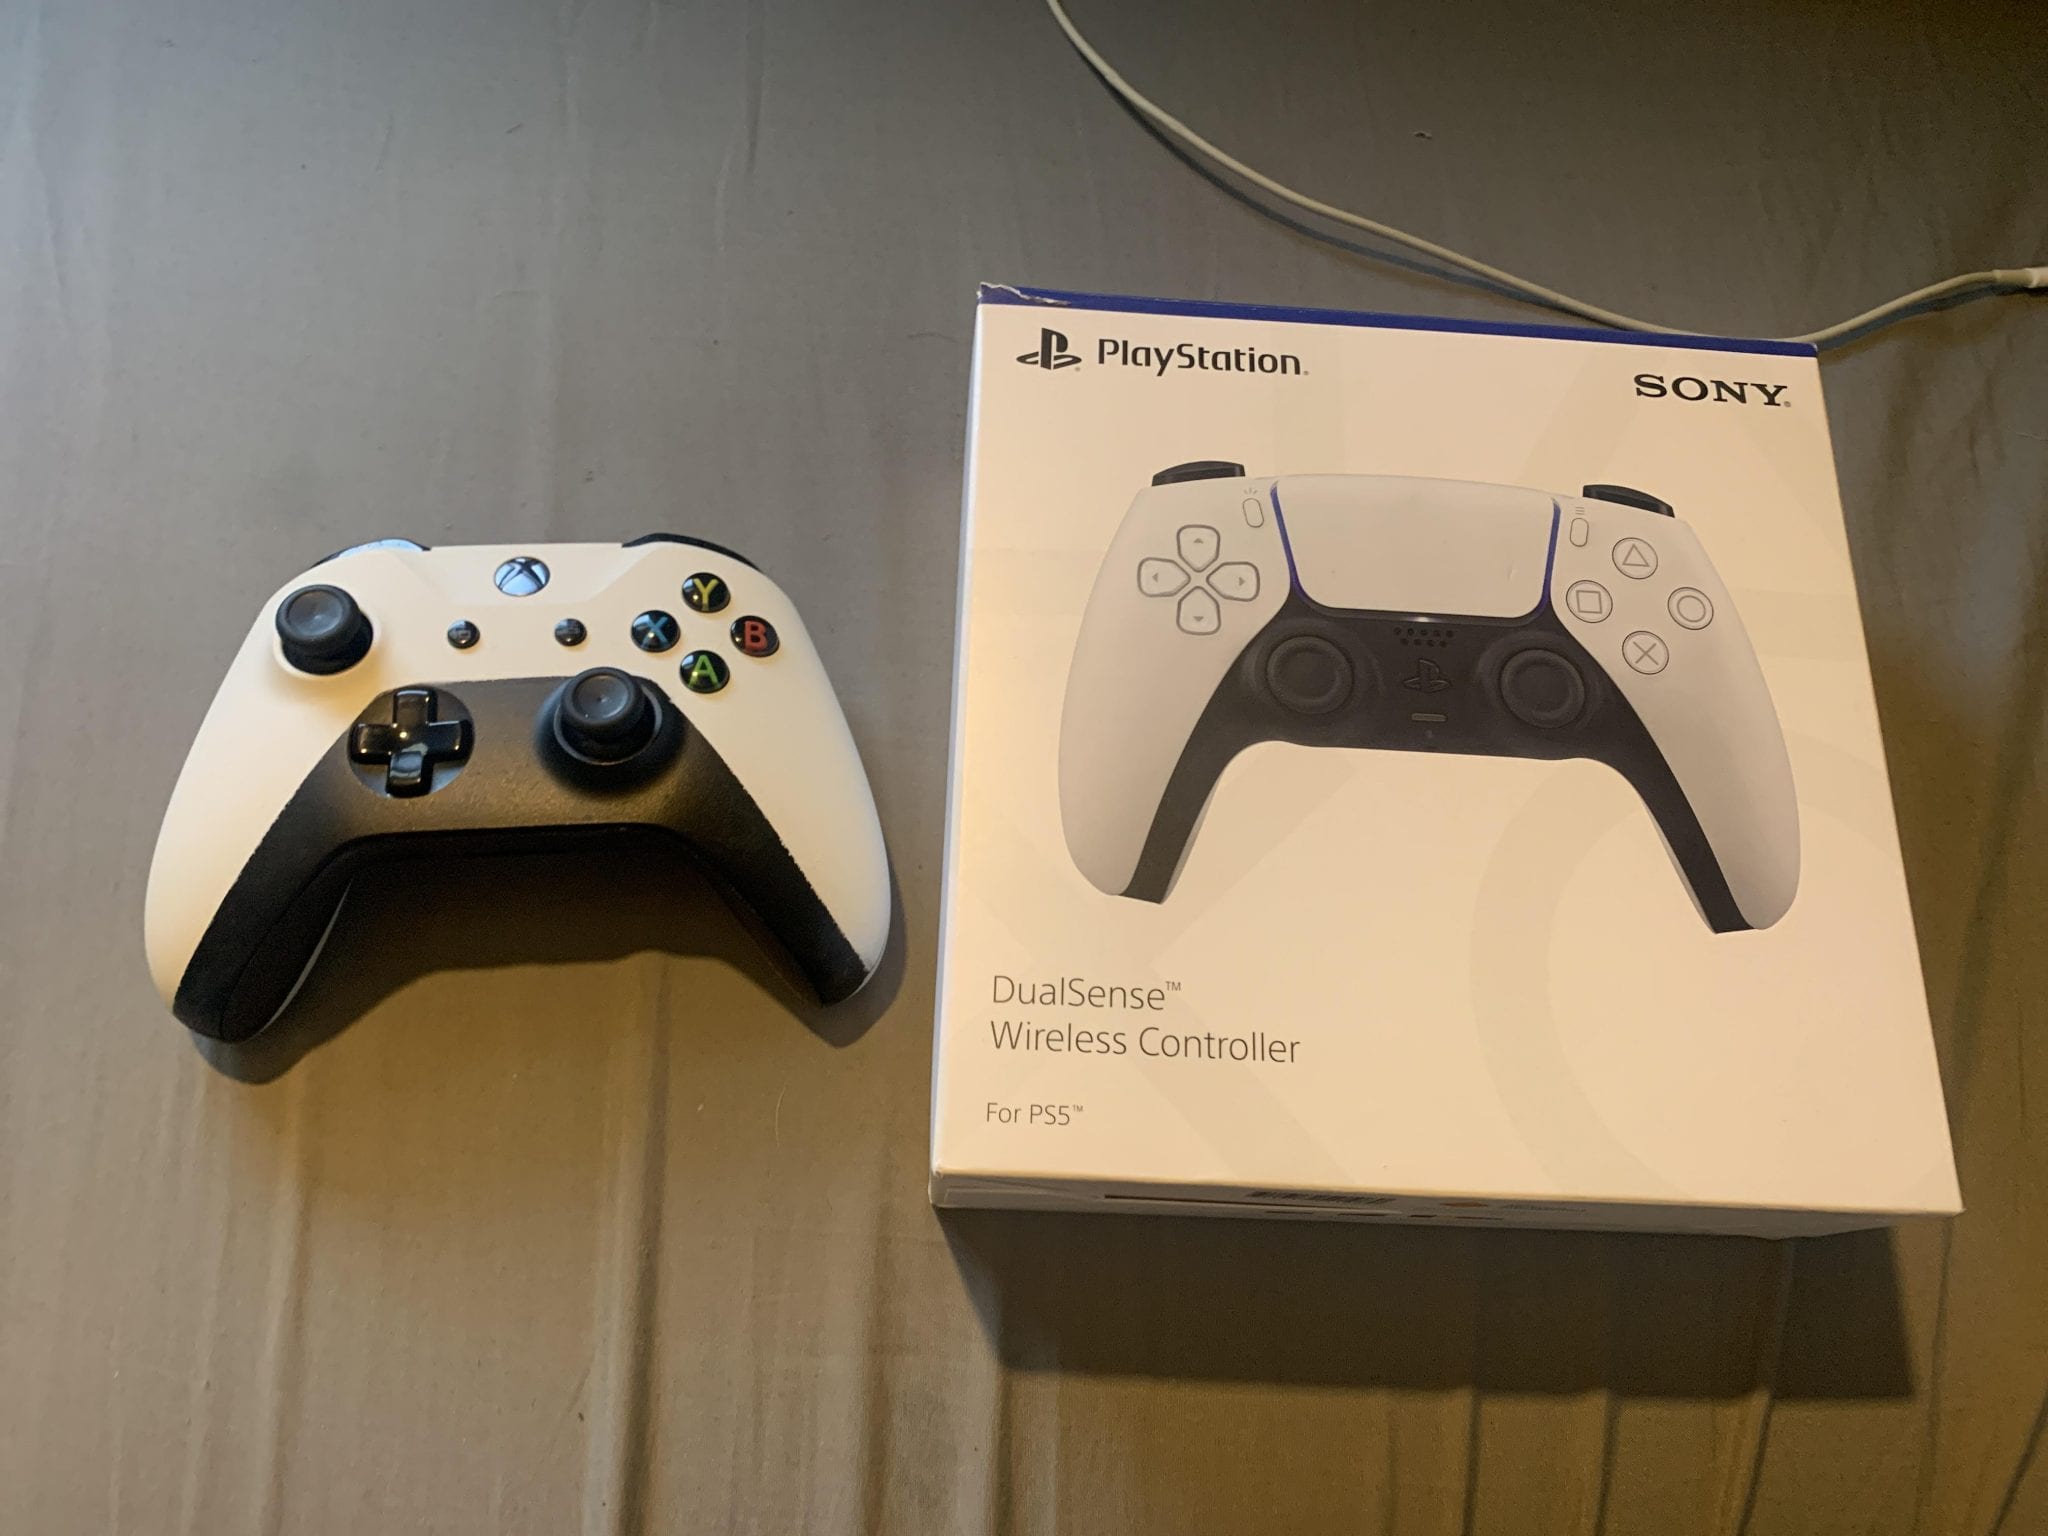 Gamer cheats after buying an Xbox controller painted like PS5 Dualsense